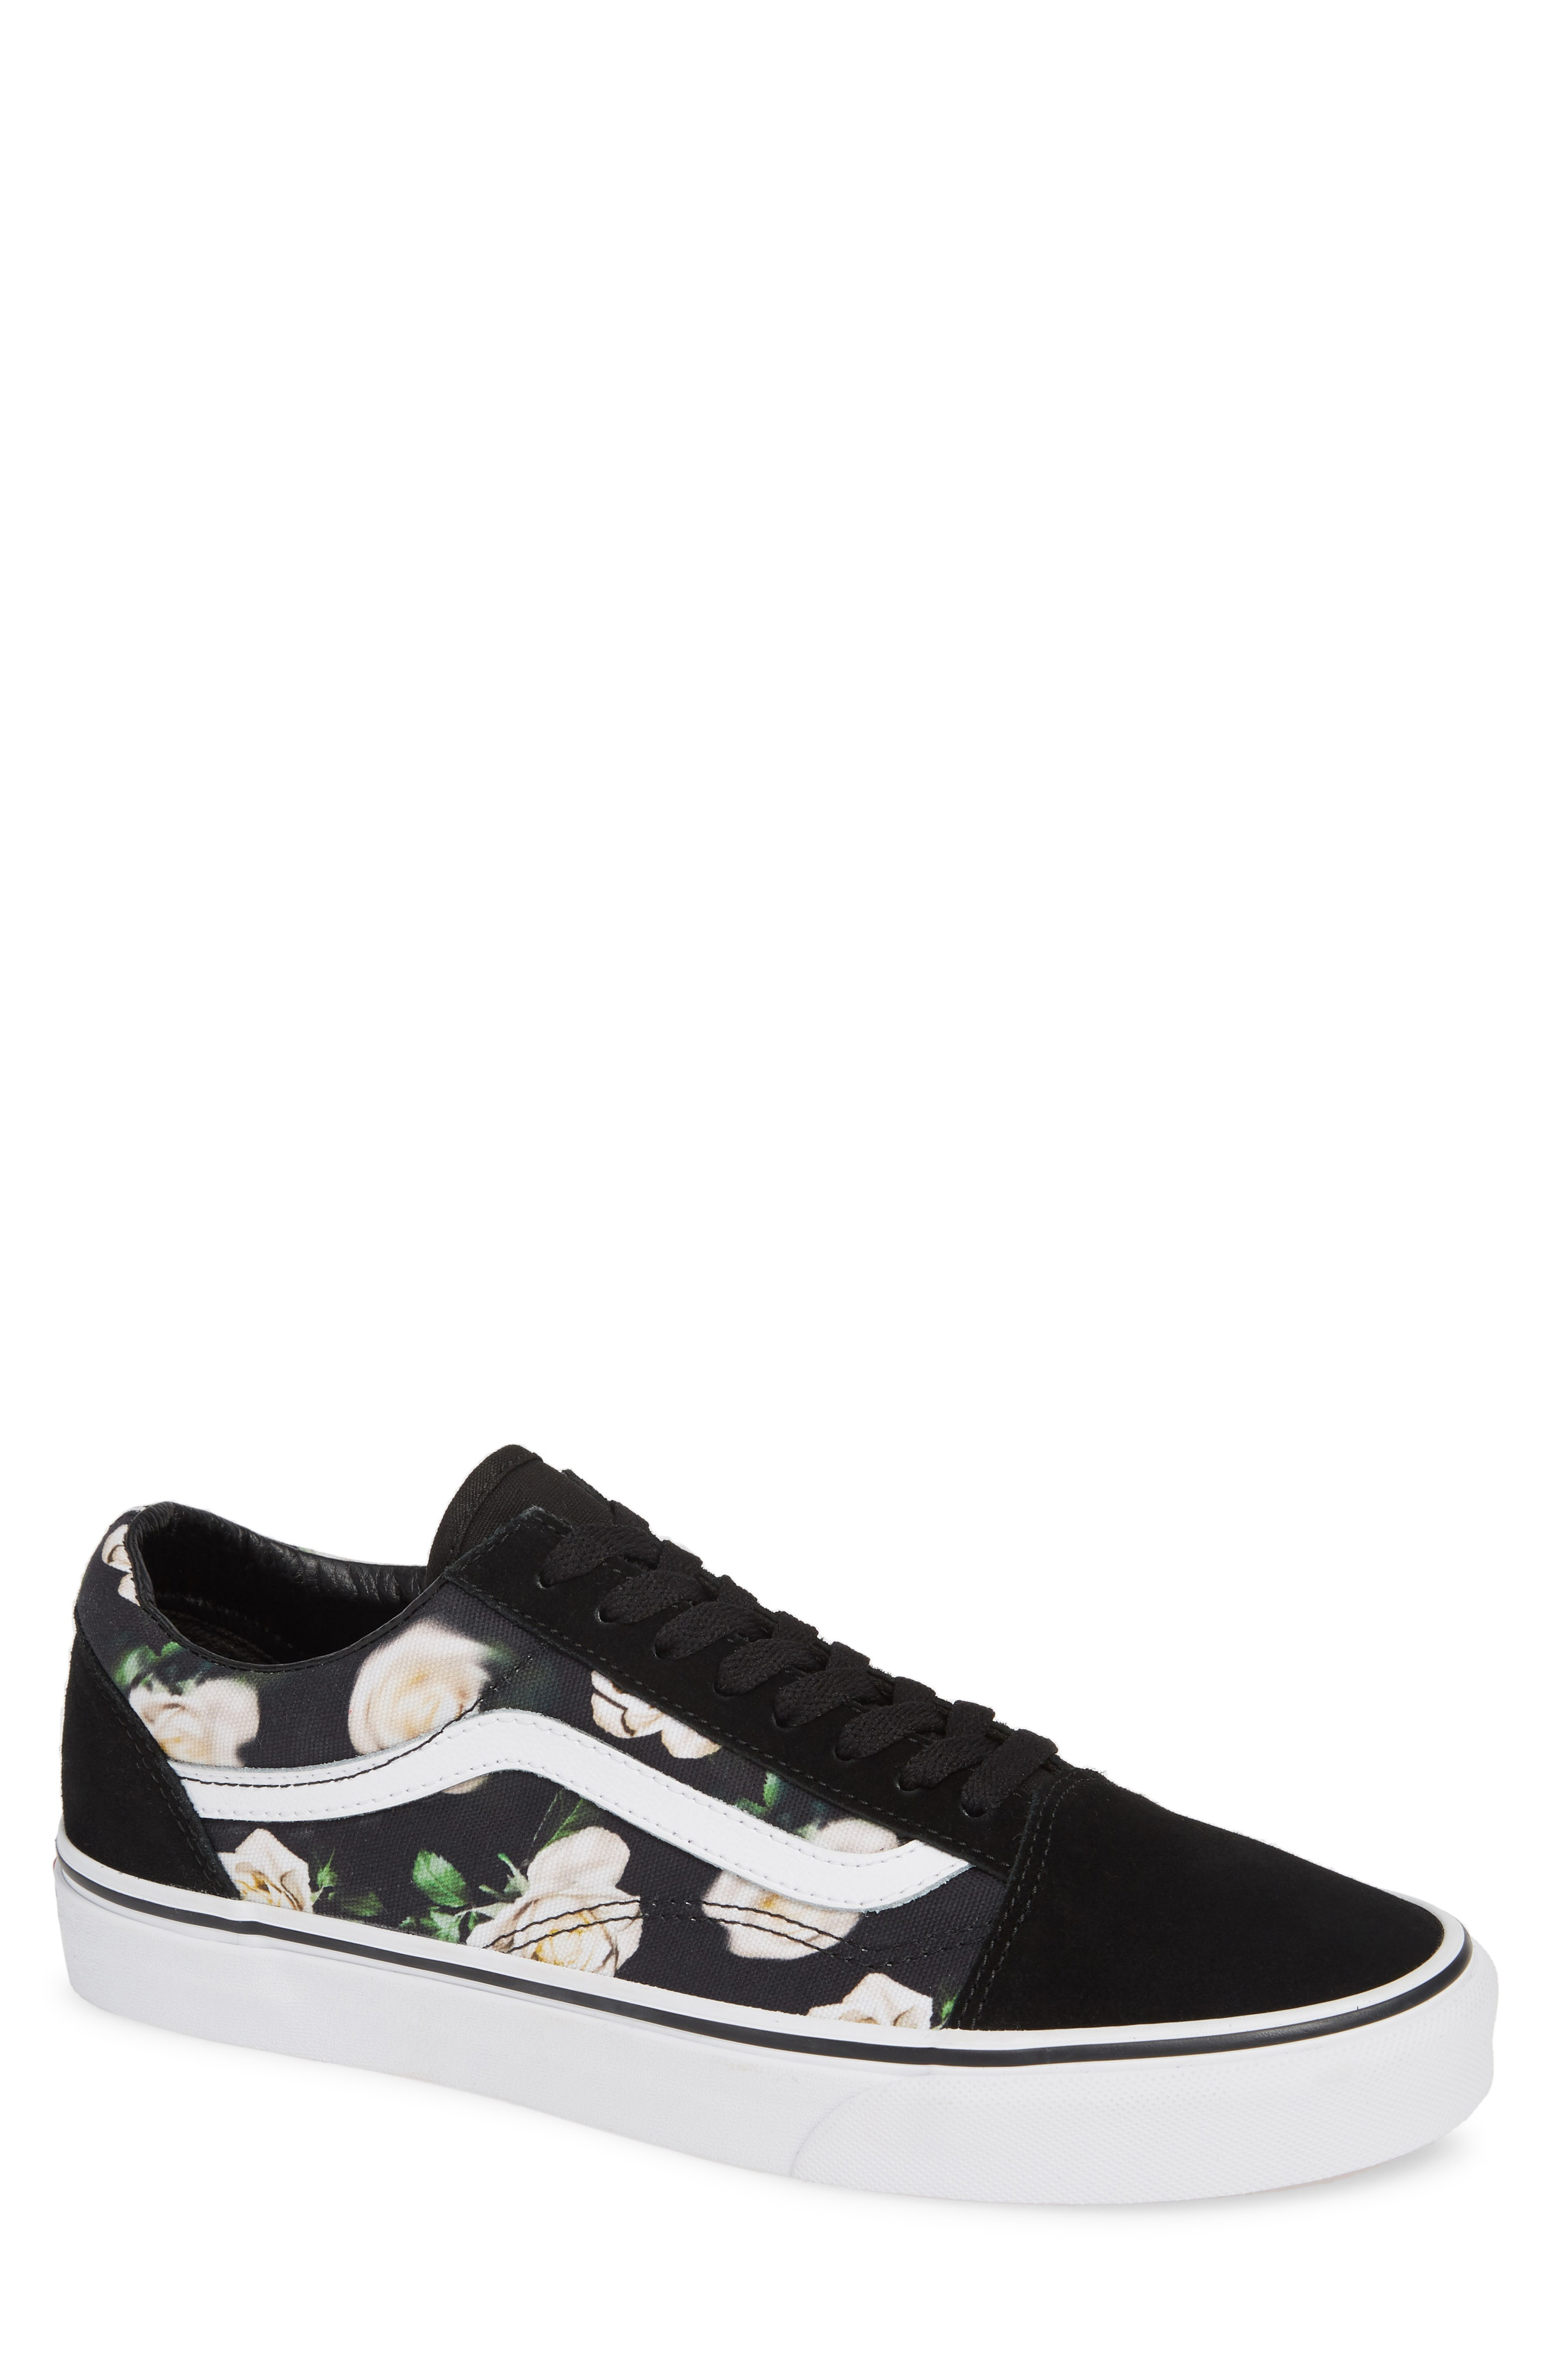 romantic floral old skool shoes